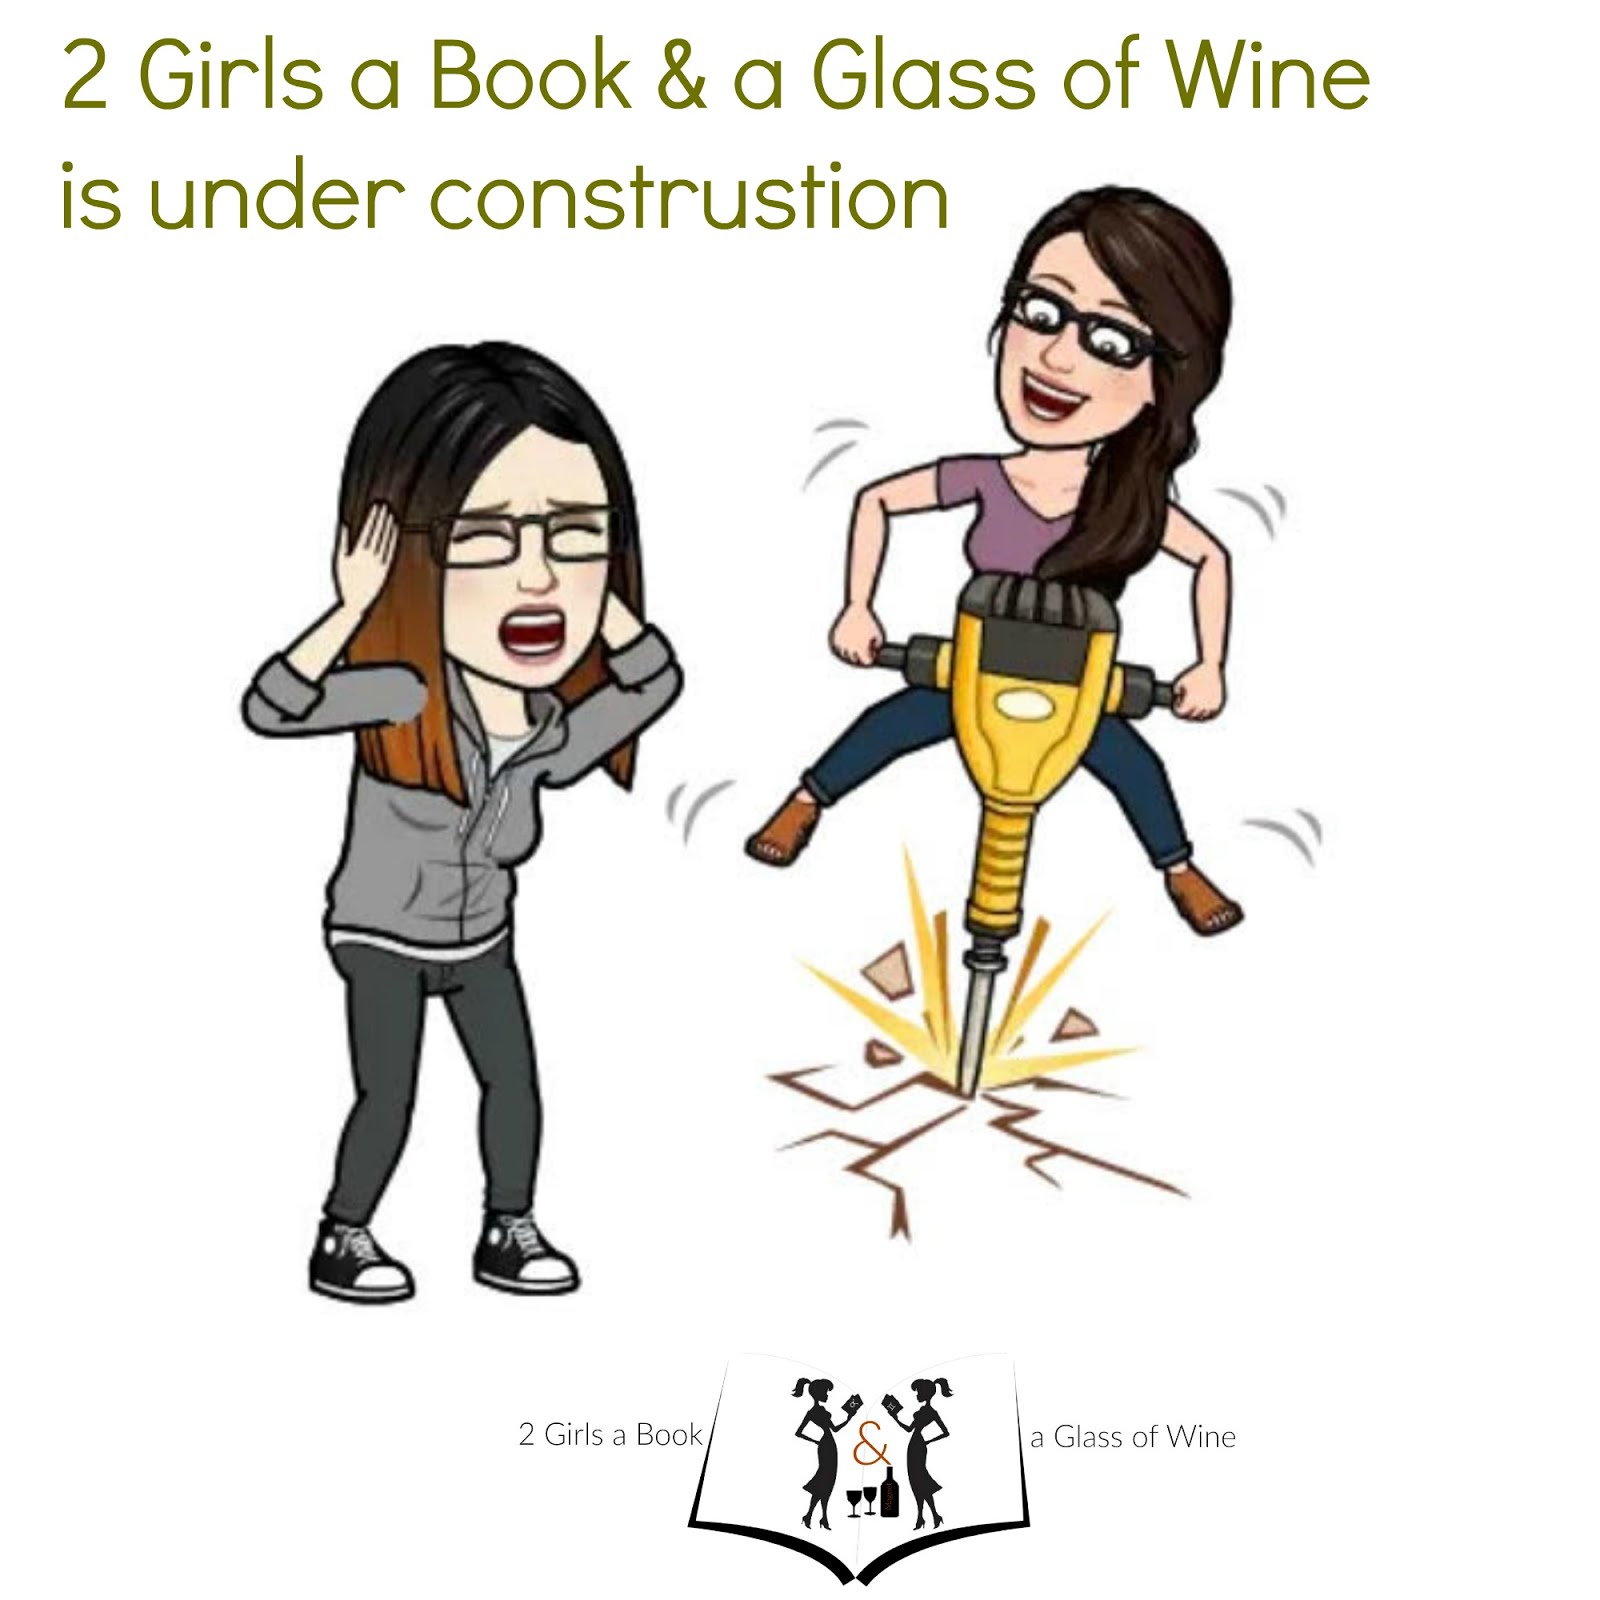 2 Girls a Book & a Glass of Wine